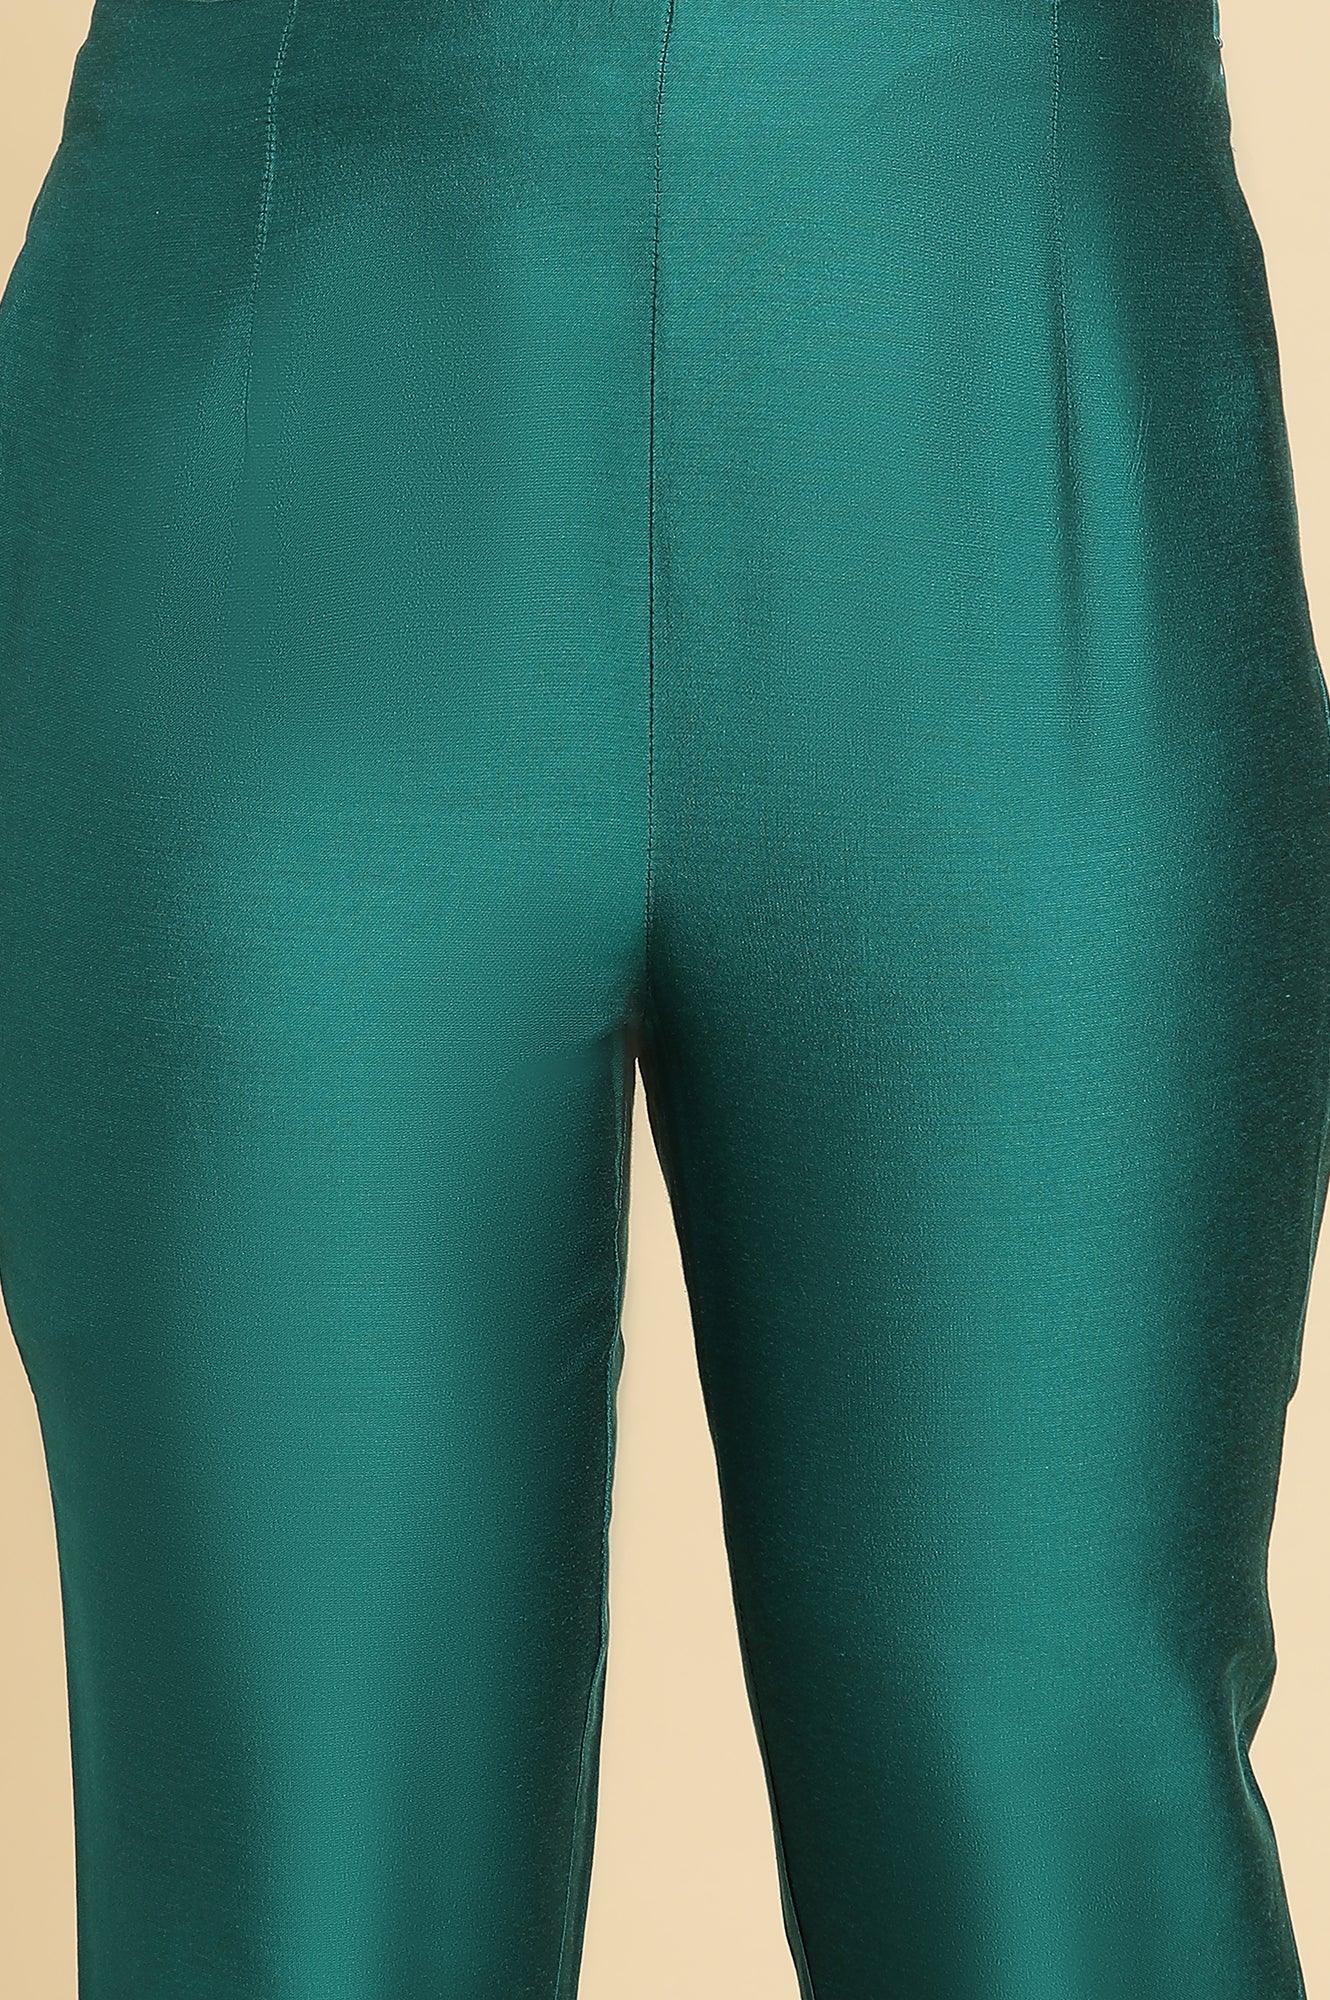 Teal Blue Slim Pant With Embroidered Hemline - wforwoman